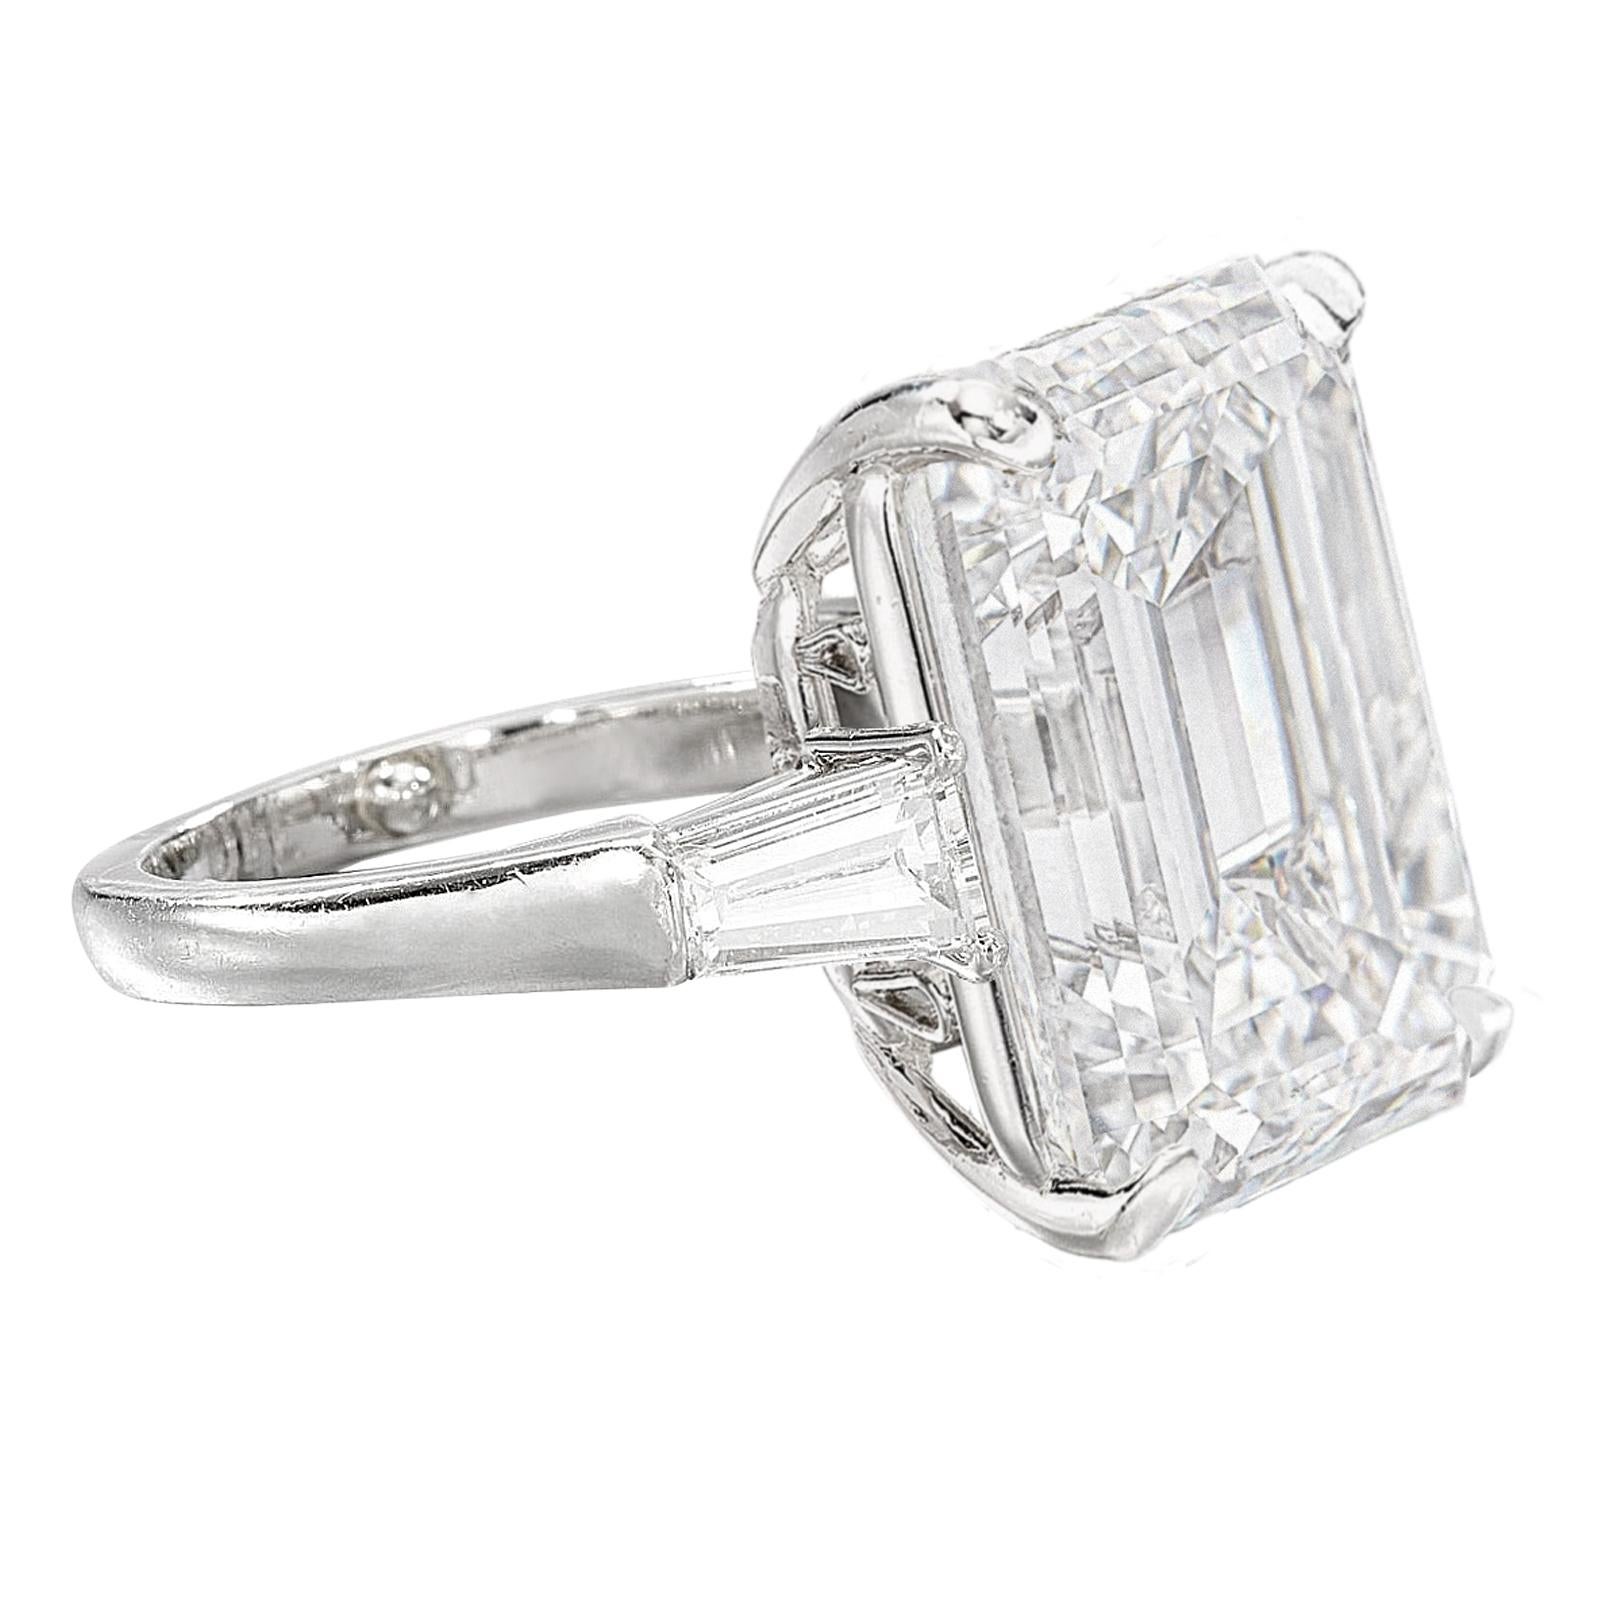 An exceptional and impressive, rare 7 carat emerald cut diamond solitaire ring. Mounted in platinum, in a fancy mounting made in Italy by our expert goldsmith.

The extremely rare diamond is accompanied by a certificate from the Gemological